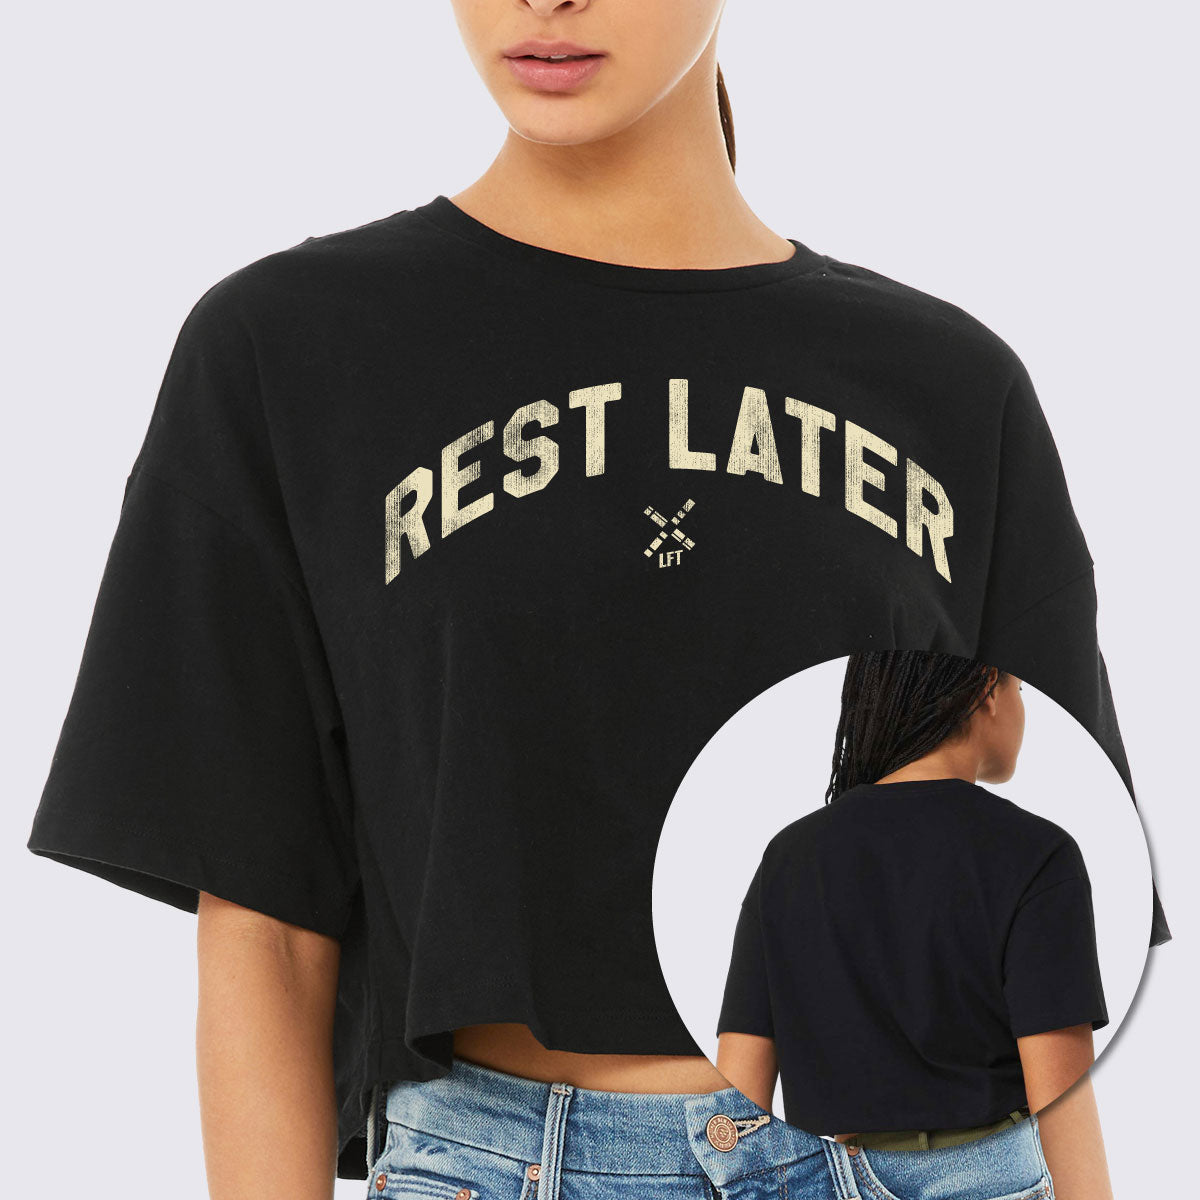 Rest Later Oversized Crop Tee